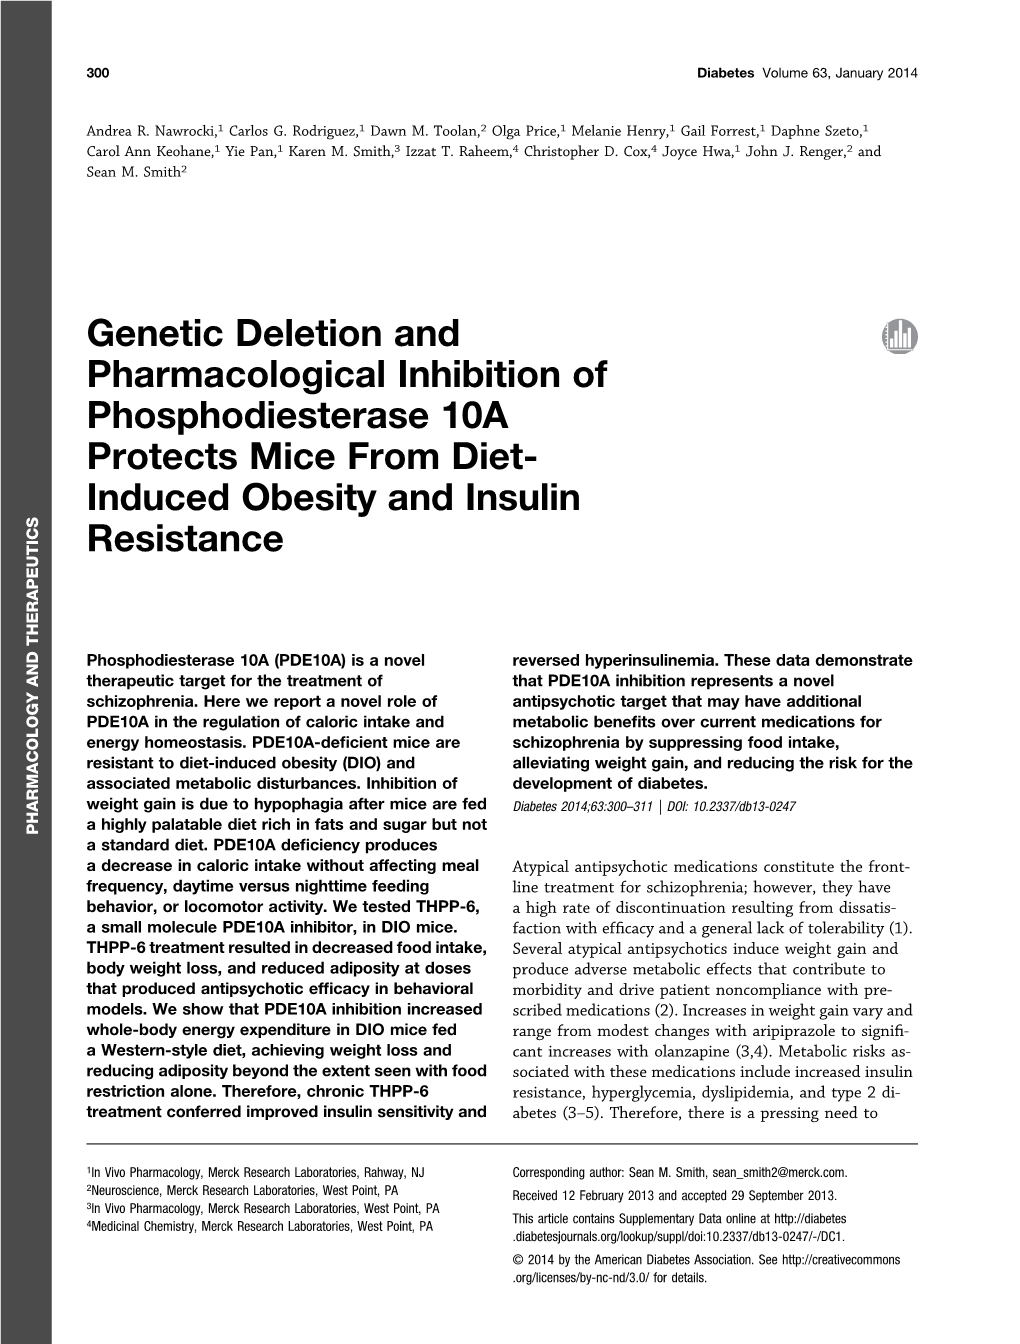 Genetic Deletion and Pharmacological Inhibition of Phosphodiesterase 10A Protects Mice from Diet- Induced Obesity and Insulin Resistance